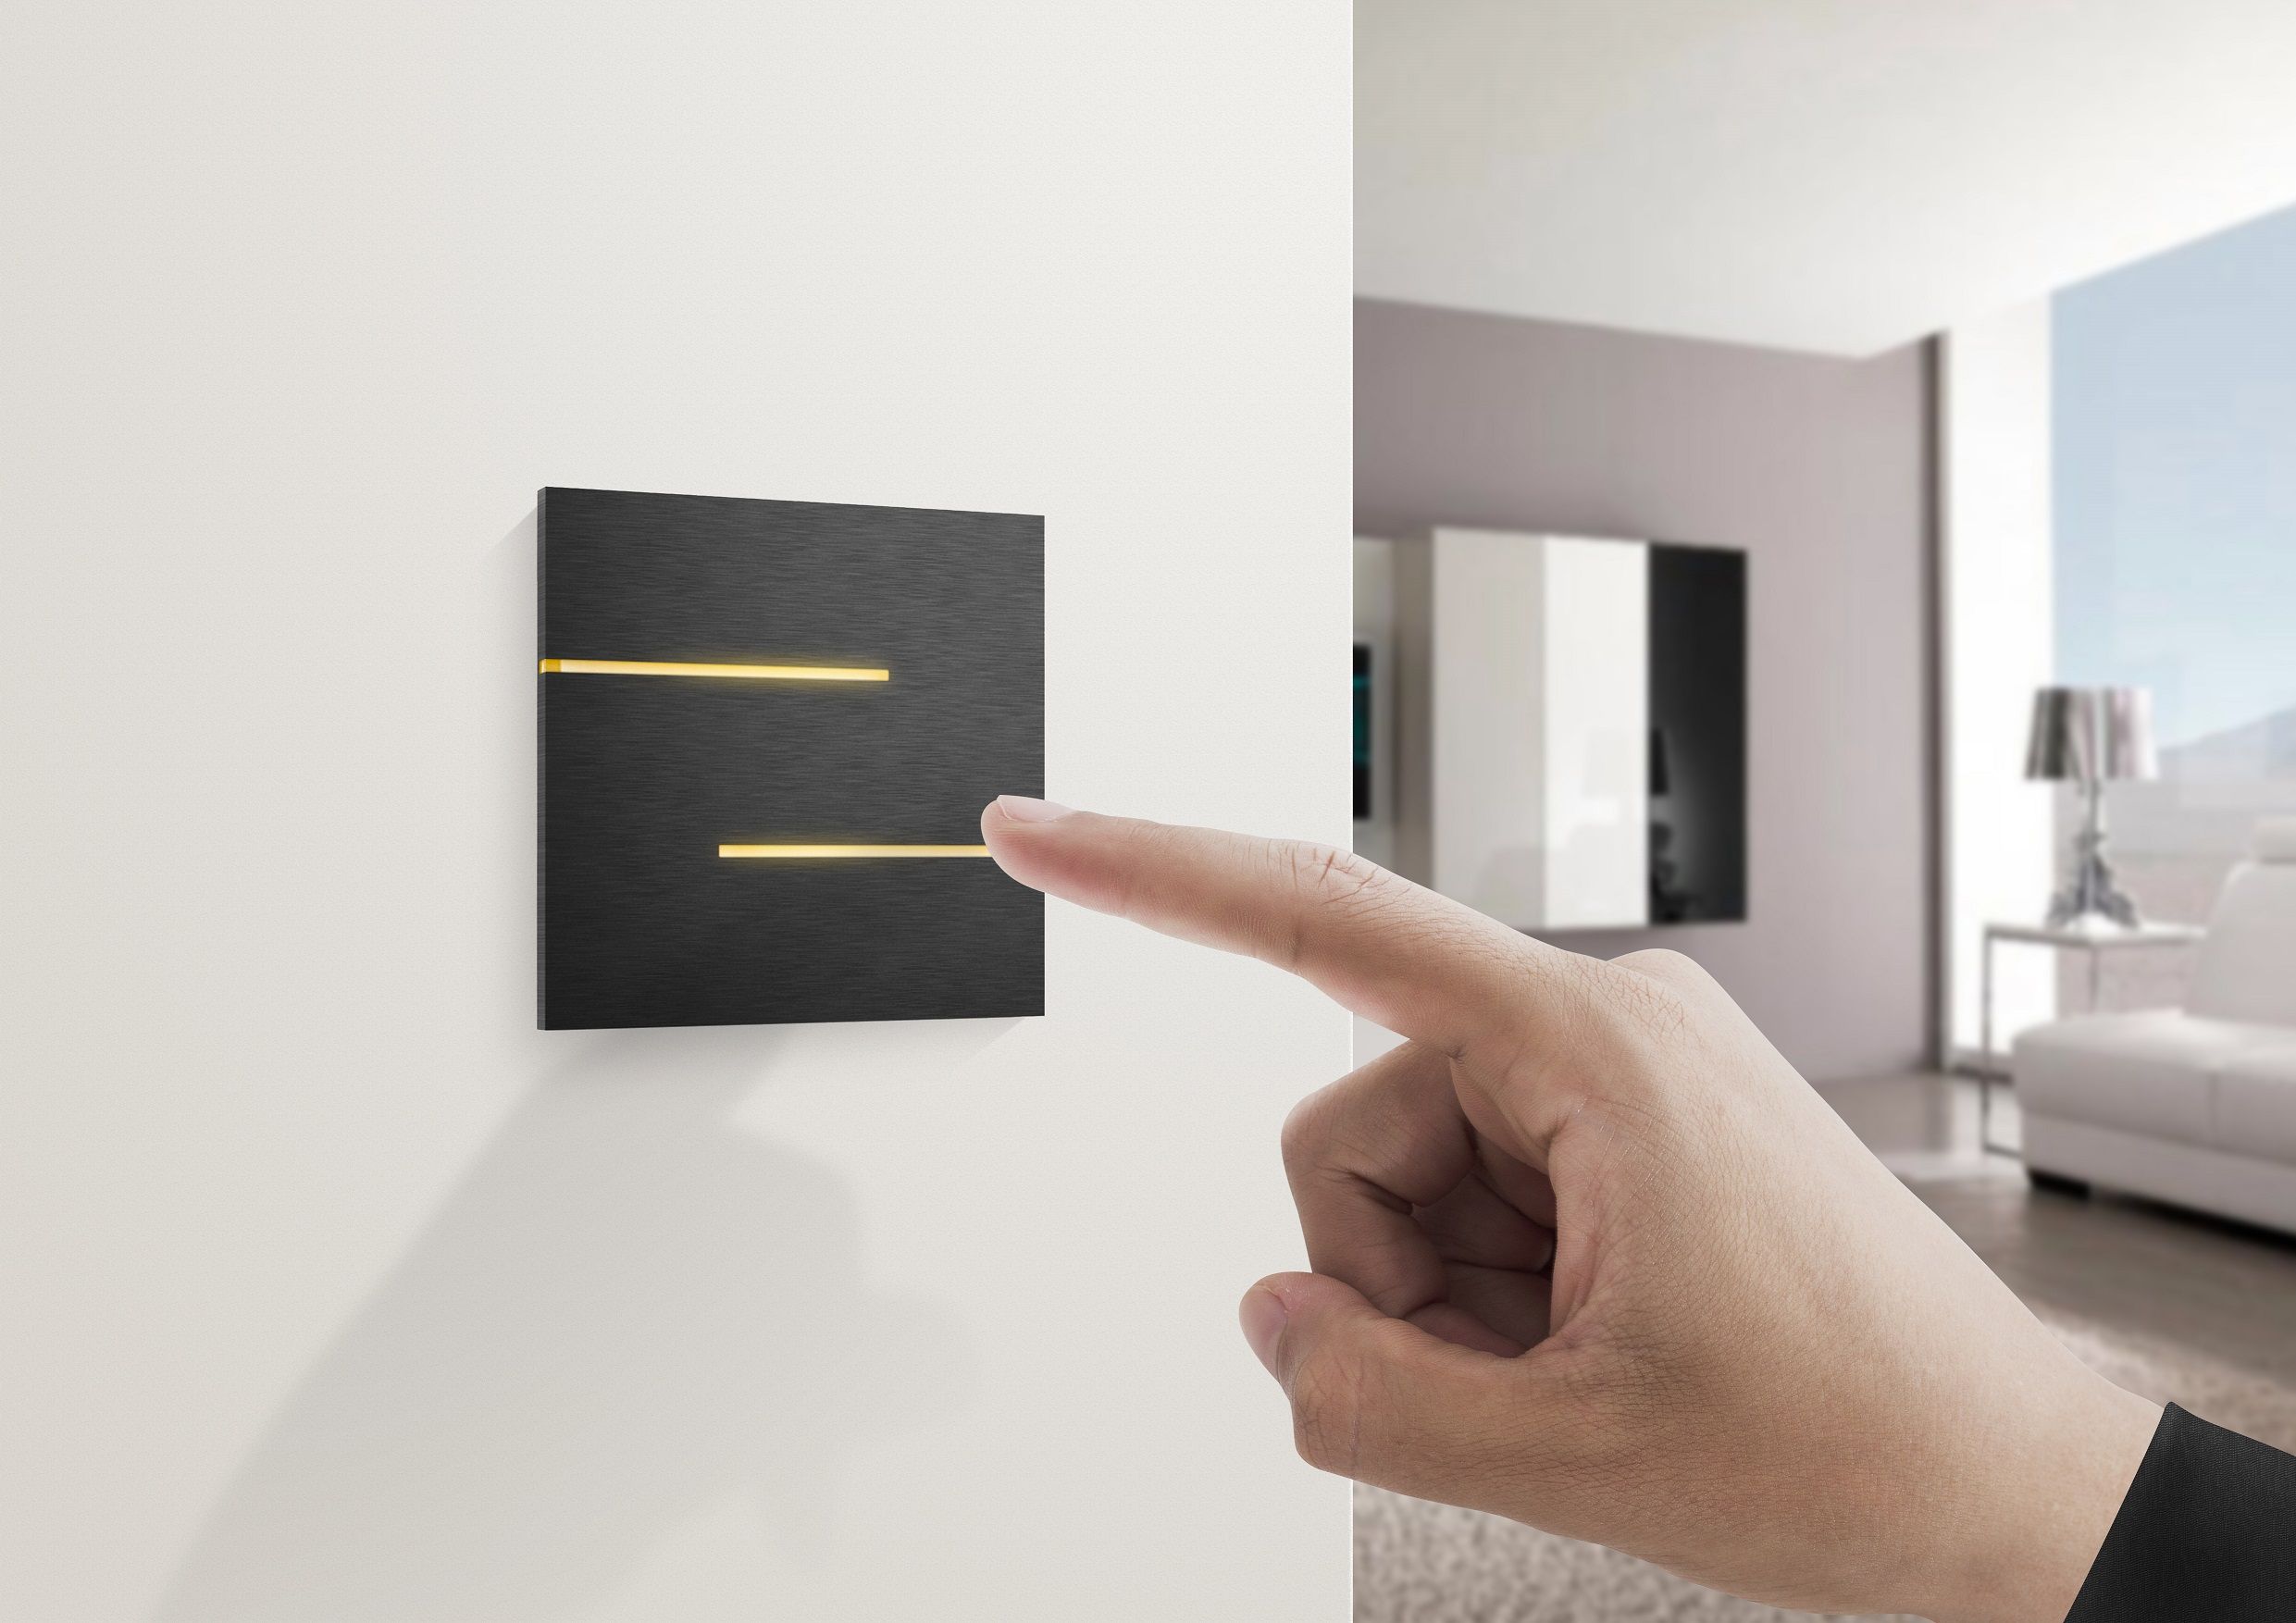 Programmable Light Switches for Energy-Efficient Lighting